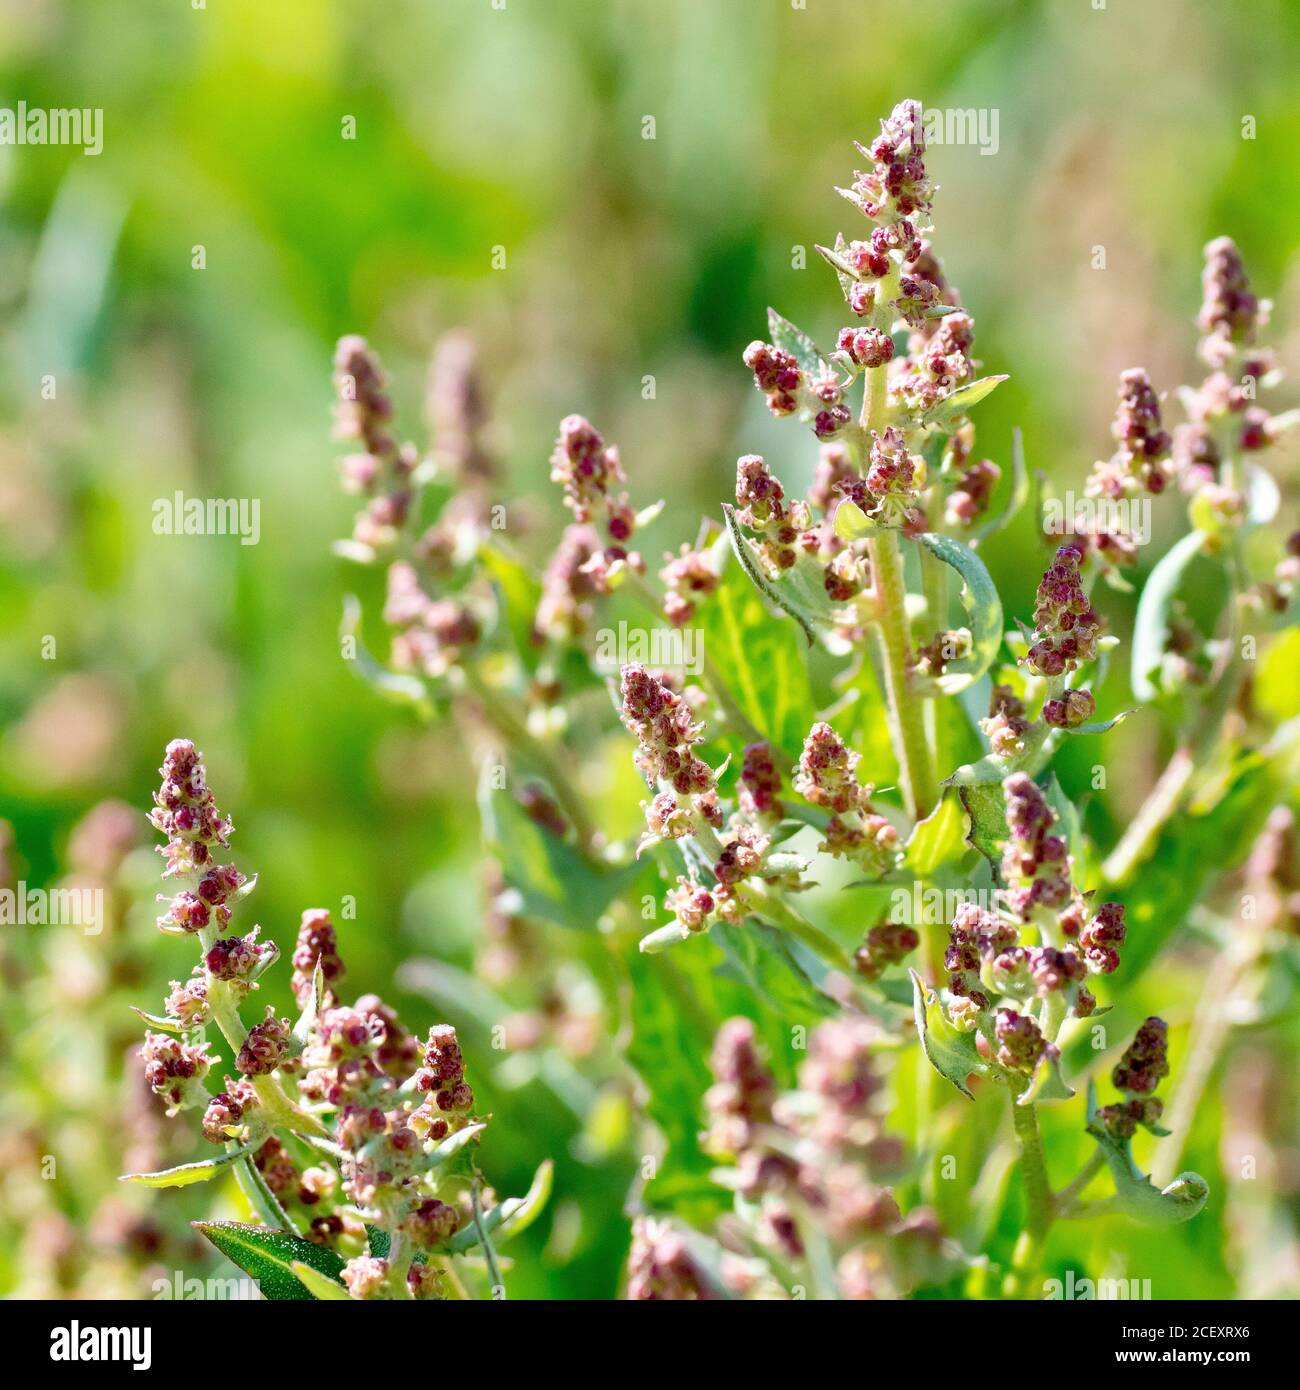 Spear-leaved Orache (atriplex prostrata), close up showing the flowering tips of the common coastal plant. Stock Photo